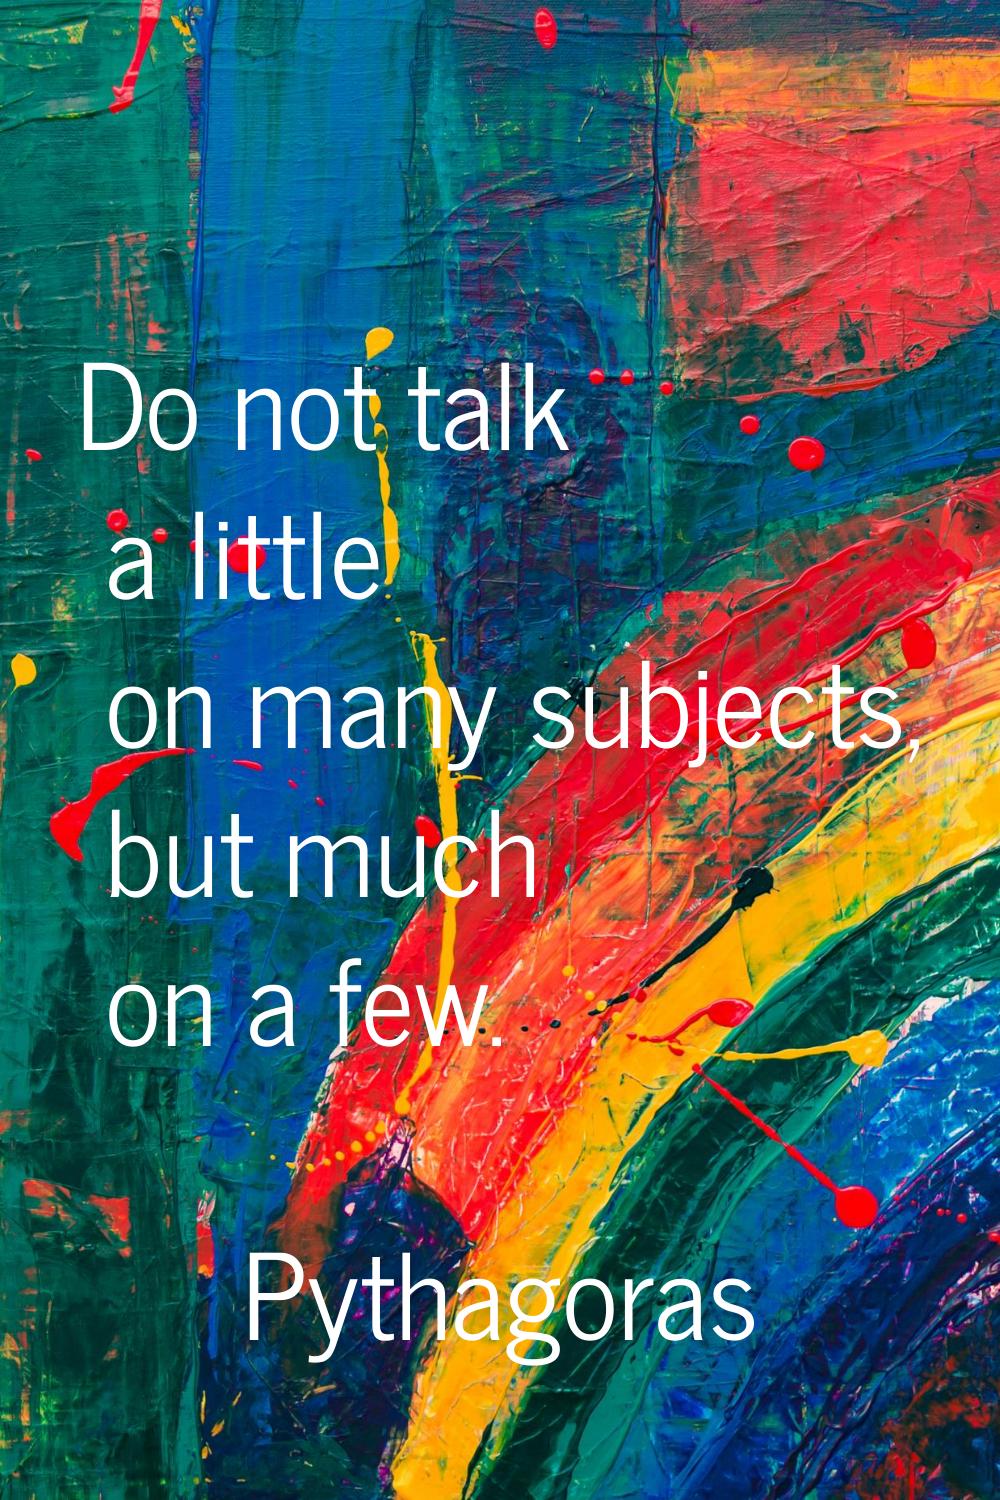 Do not talk a little on many subjects, but much on a few.